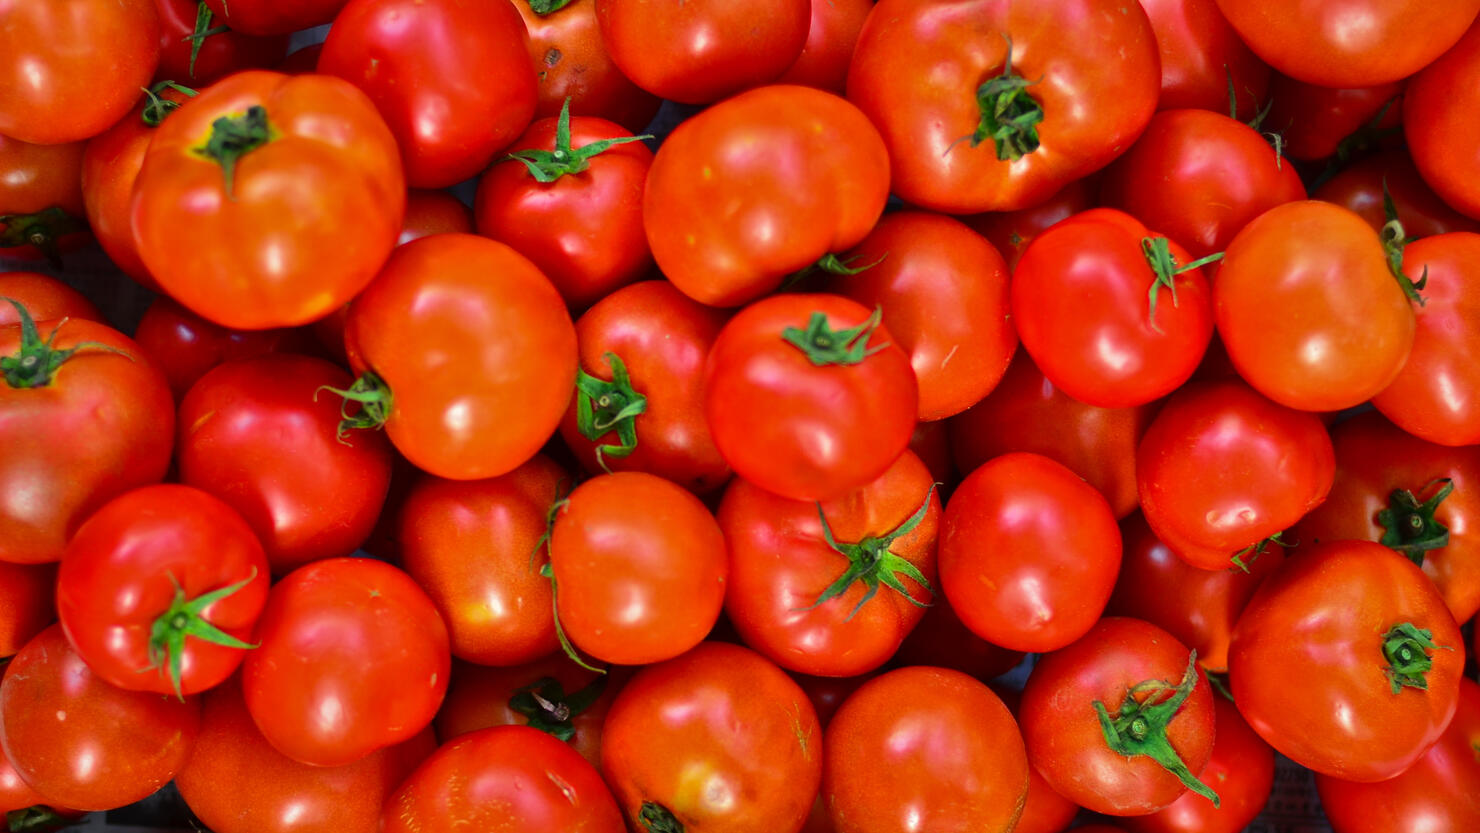 Pack of tomatoes